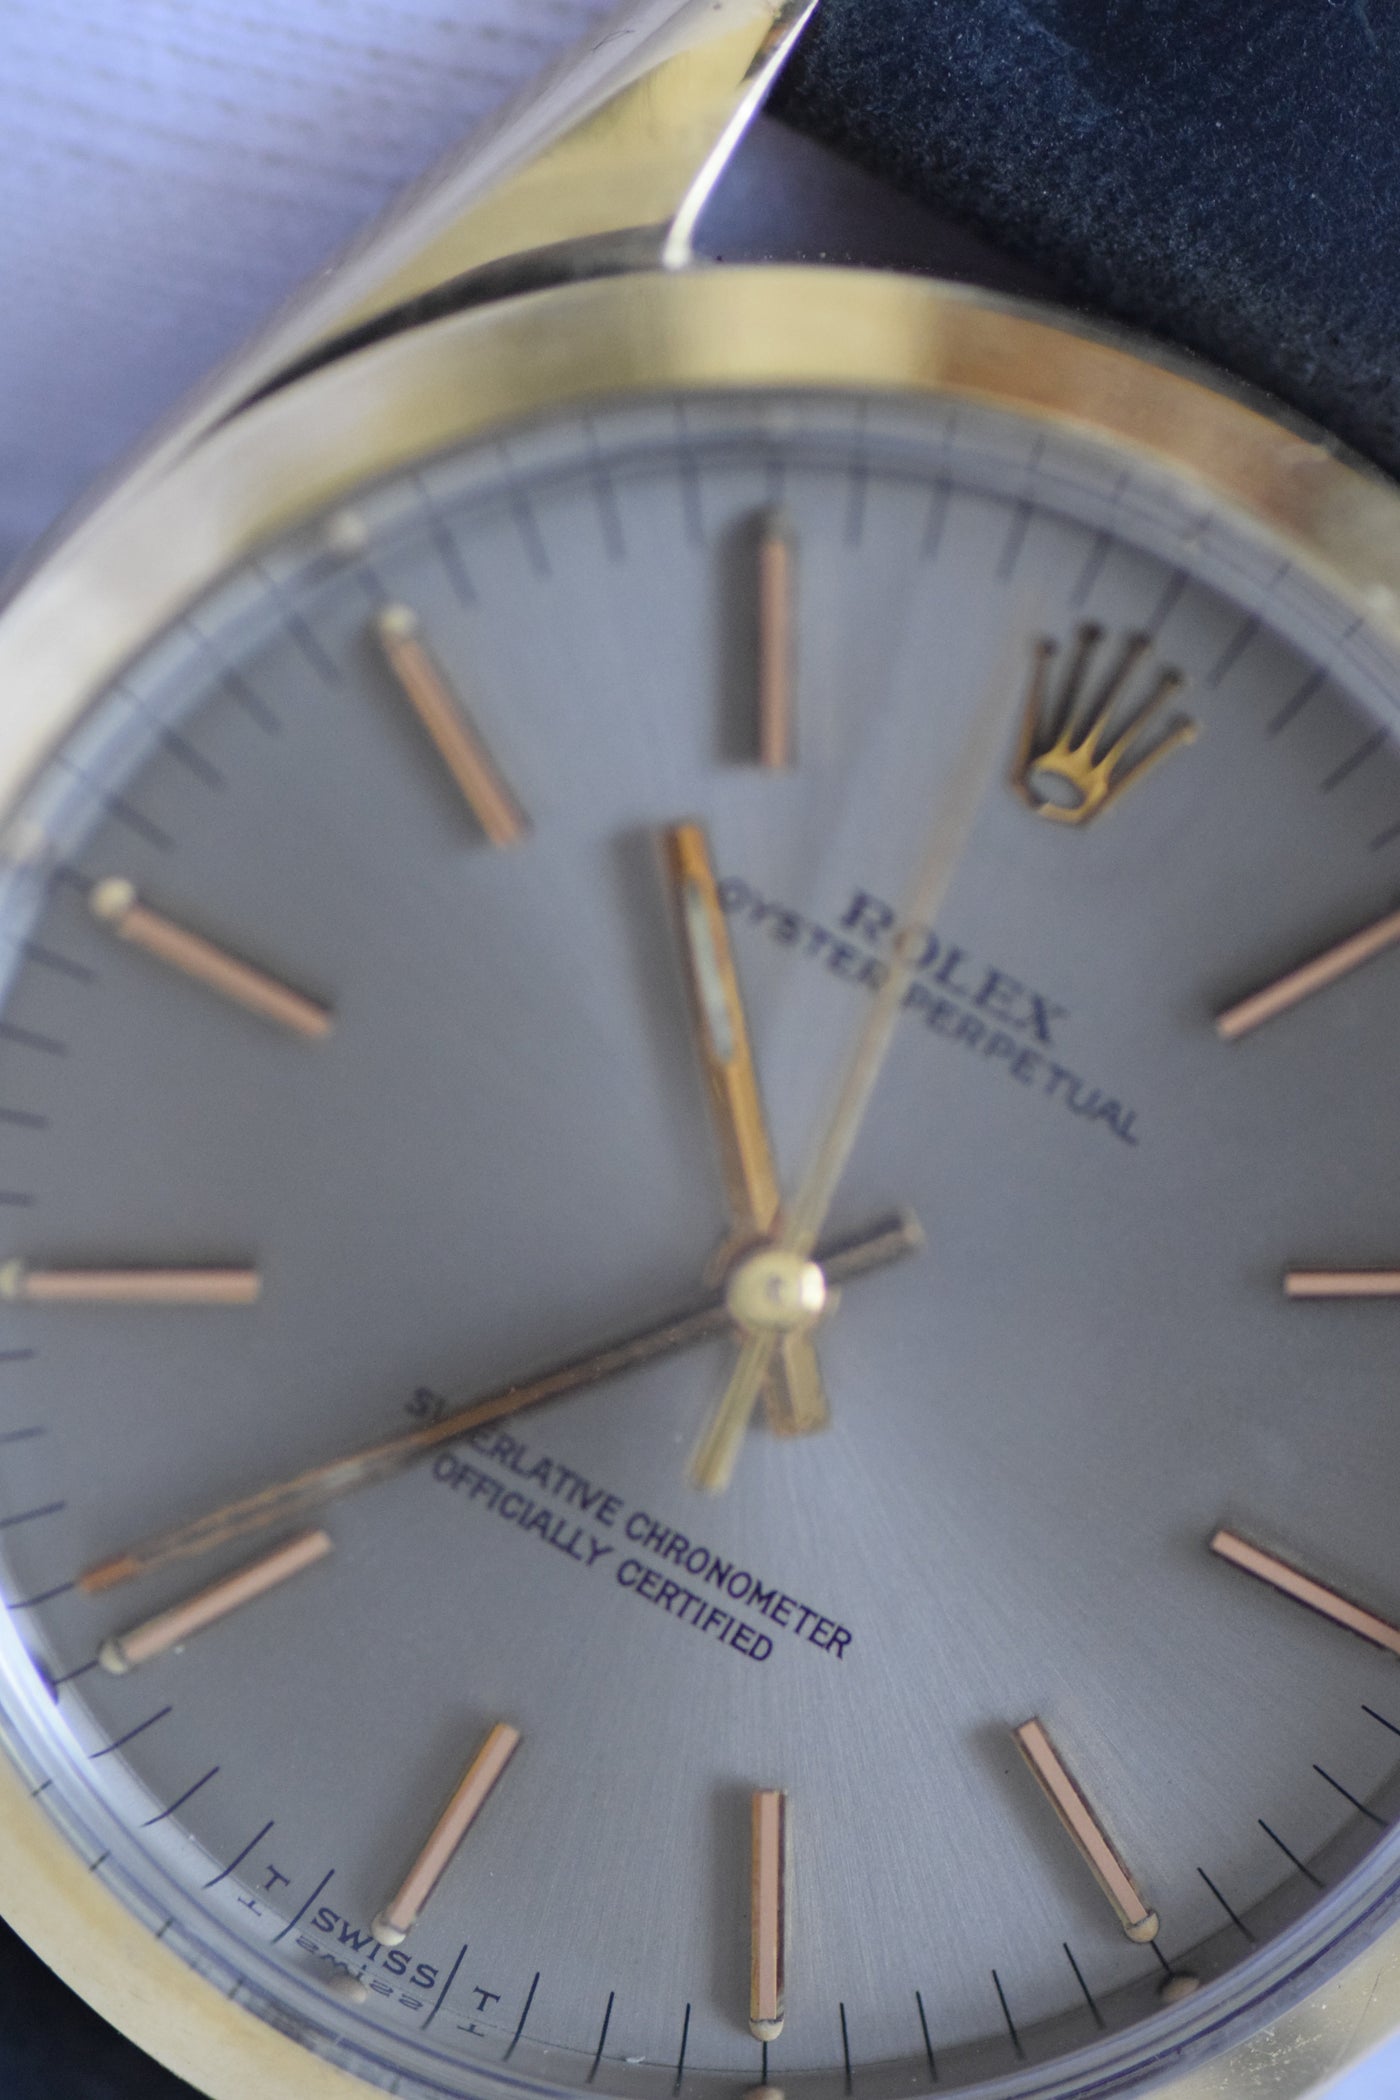 1970s Rolex Oyster Perpetual Ref.1024